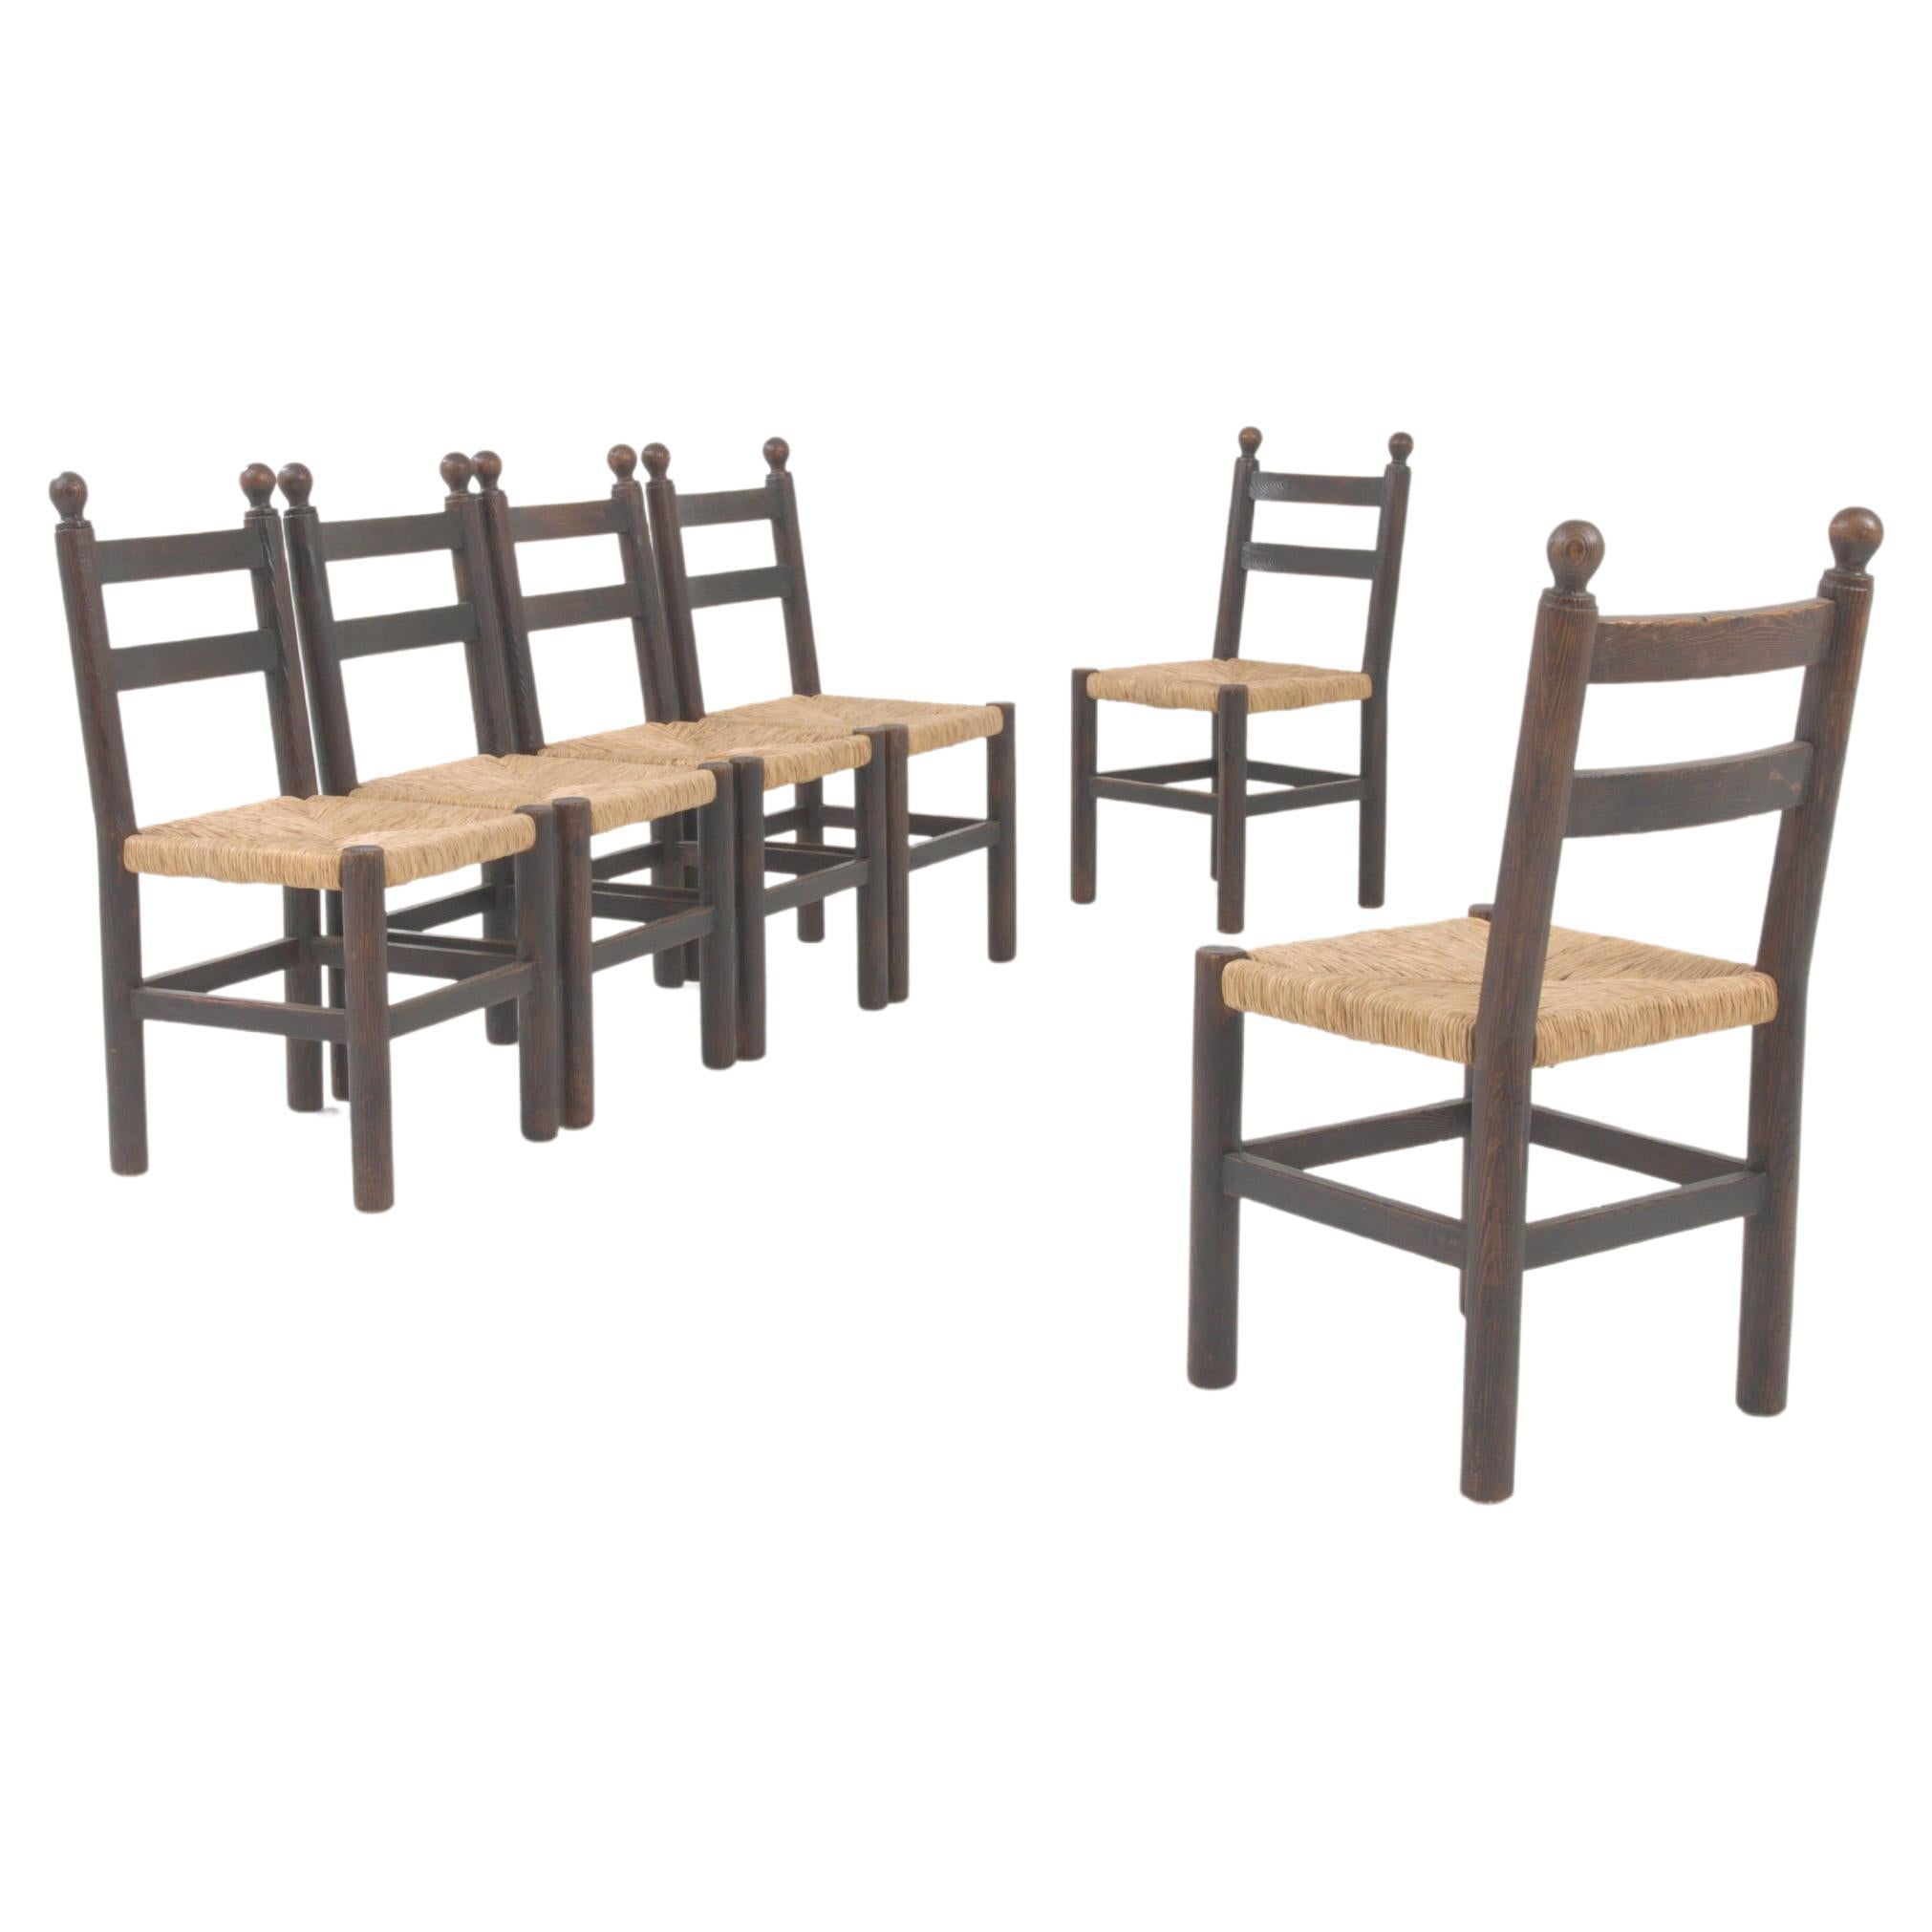 20th Century French Wooden Dining Chairs With Wicker Seats, Set of 6